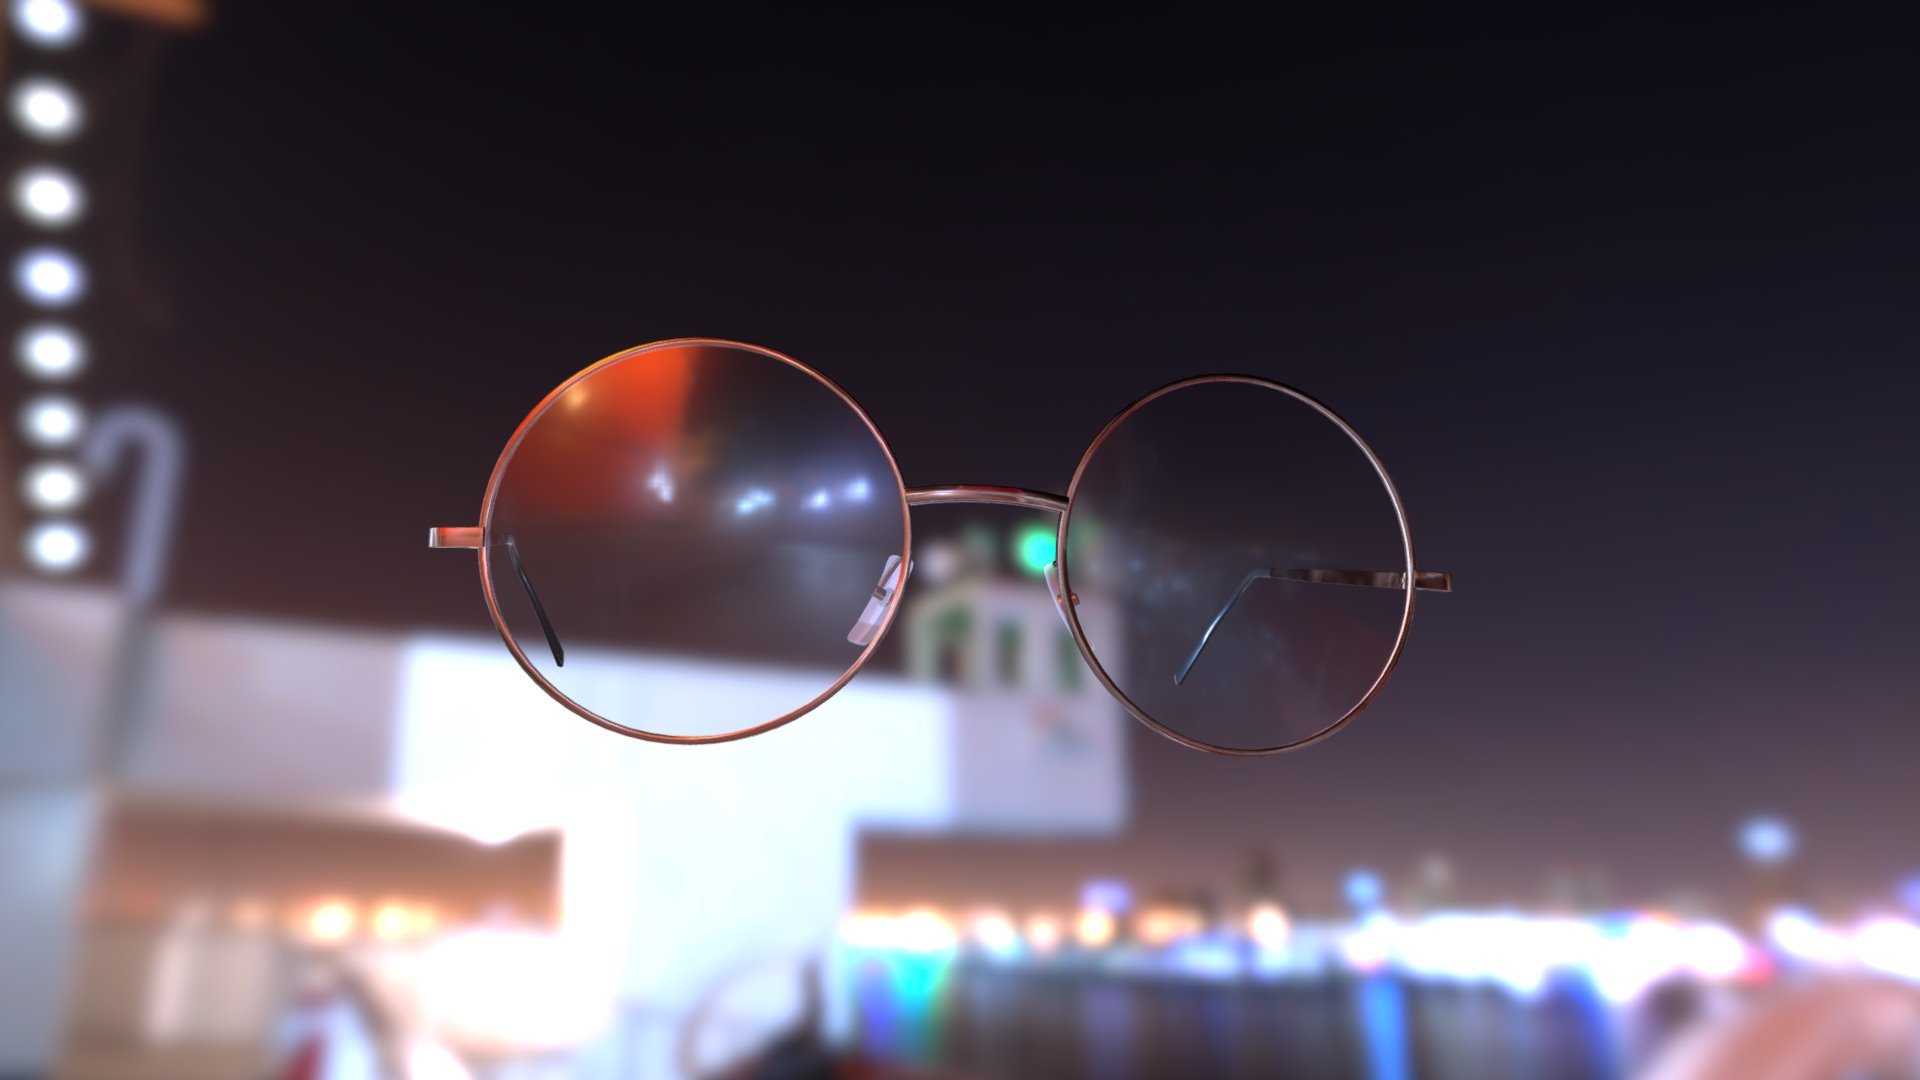 This model was made for VirTry.net - Round glasses 3d model